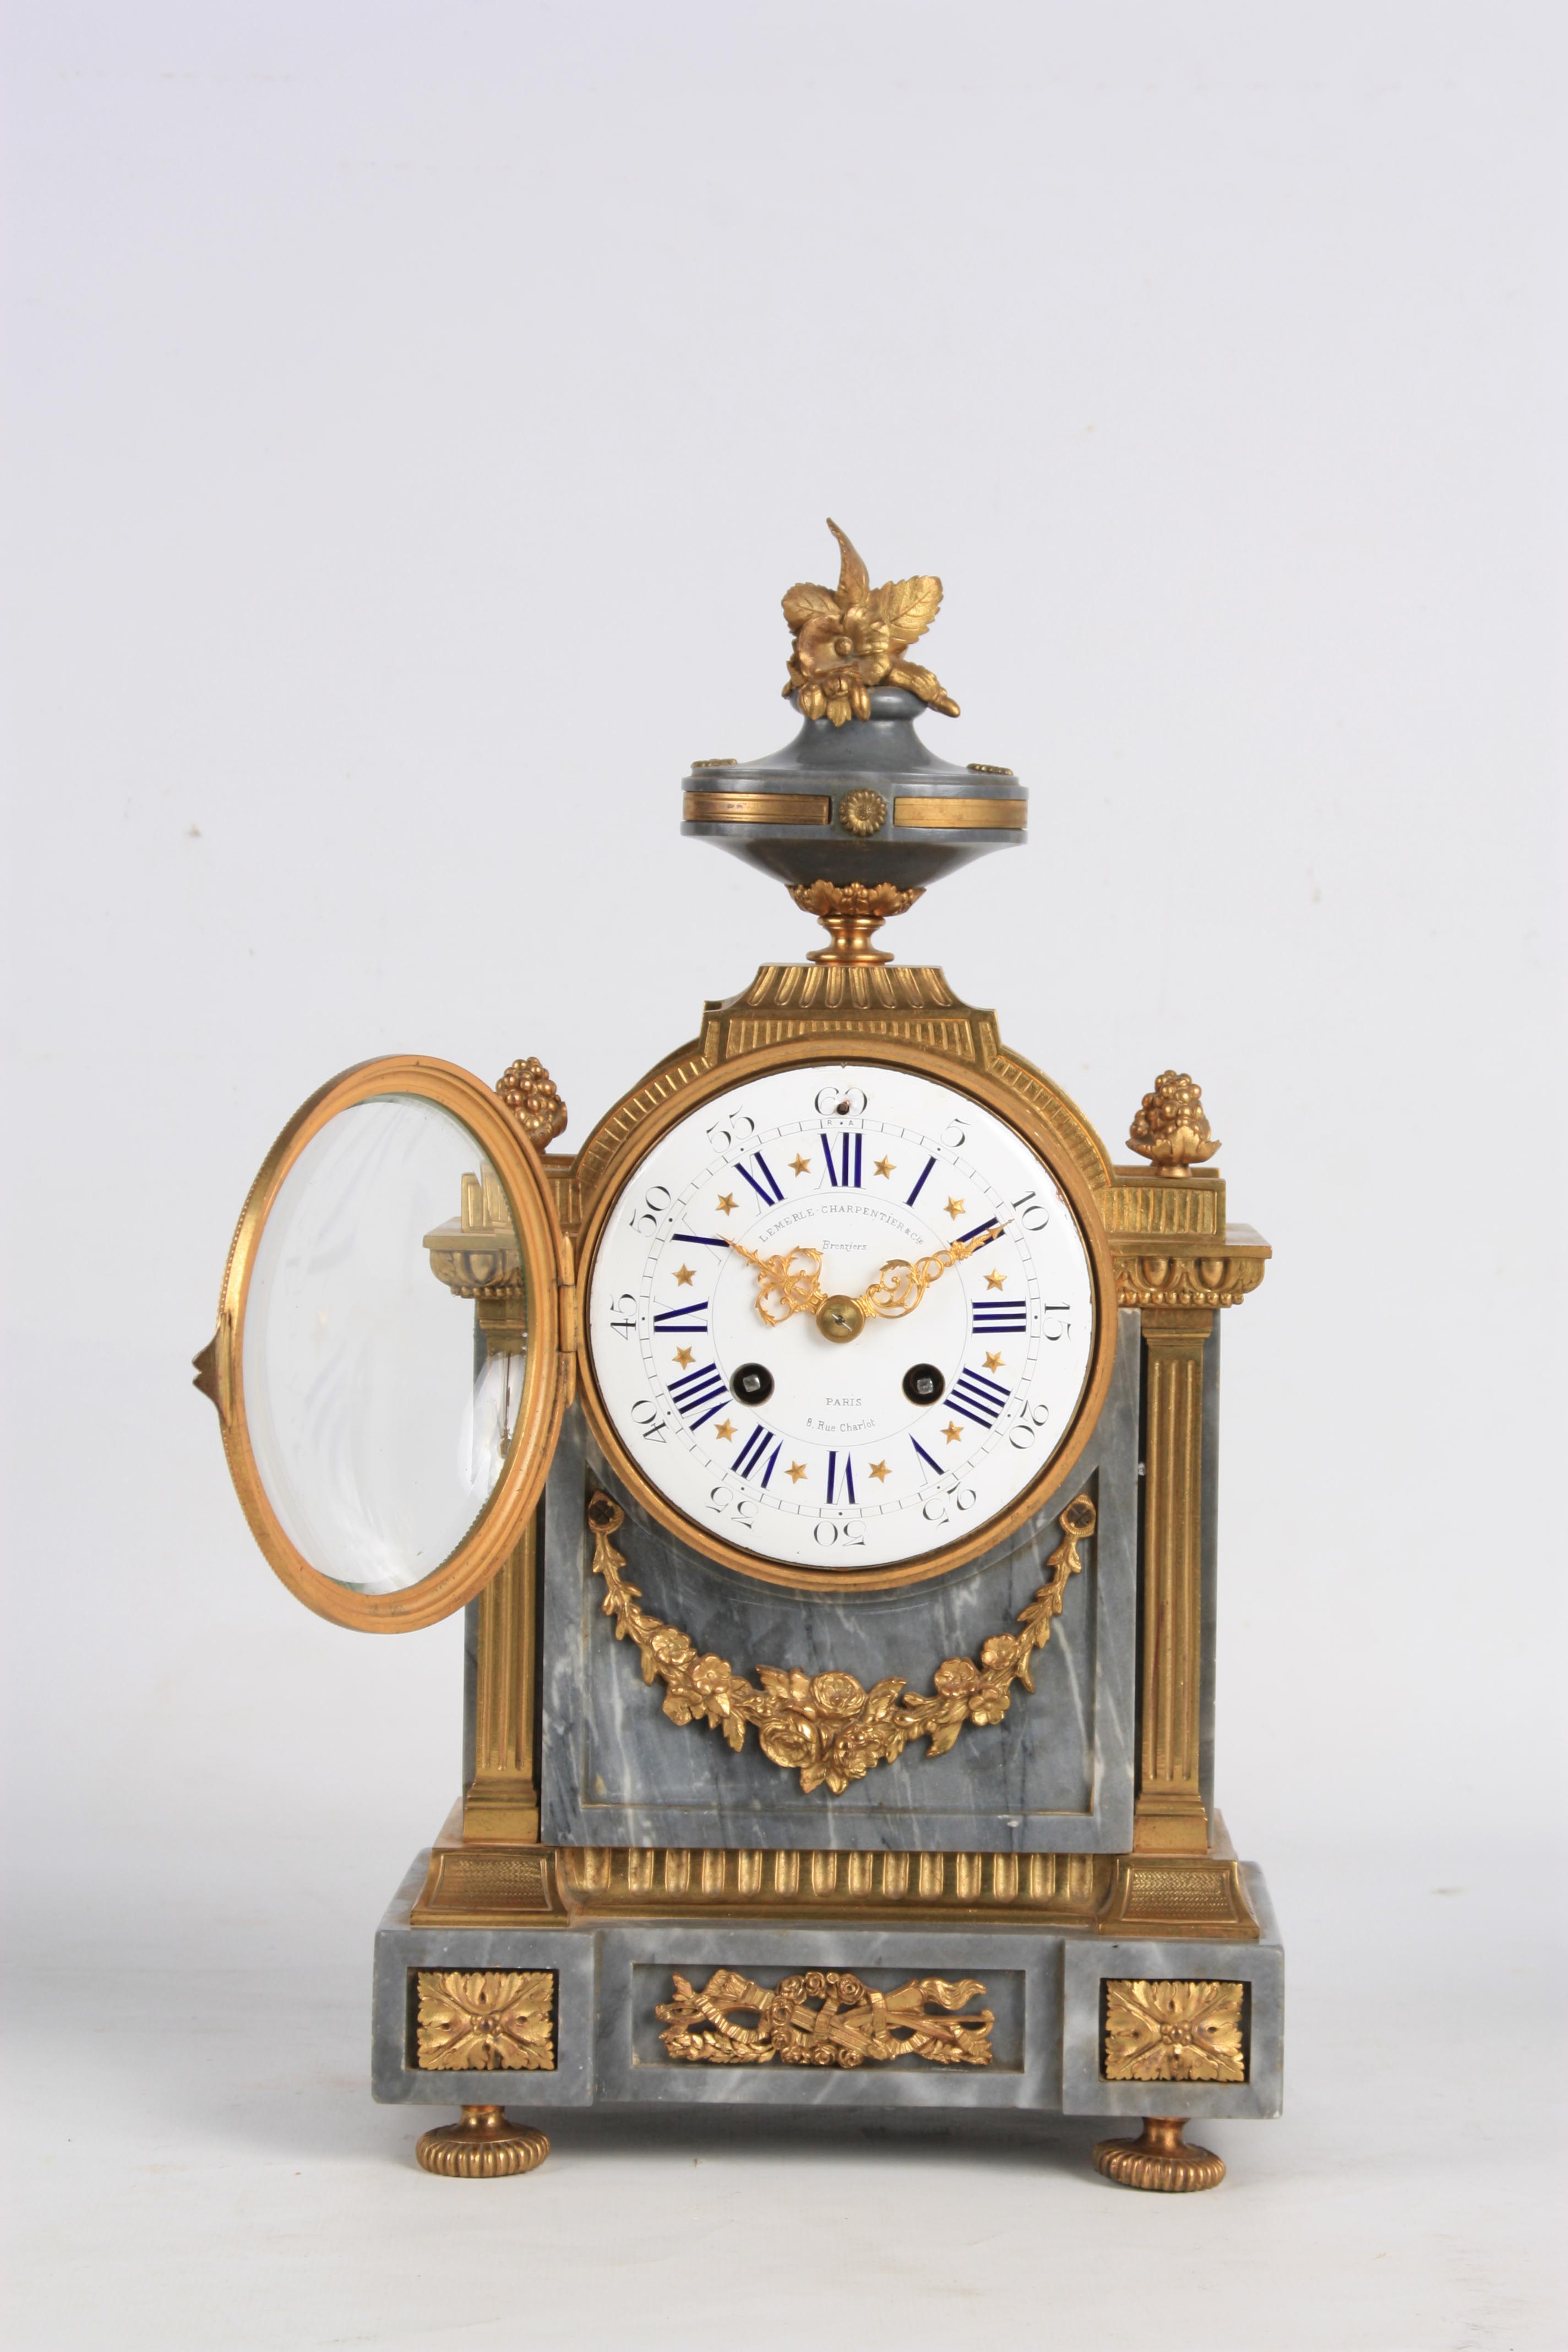 LEMERLE-CHARPENTIER & CIE, PARIS A MID 19TH CENTURY FRENCH MARBLE AND ORMOLU CLOCK GARNITURE the - Image 3 of 14